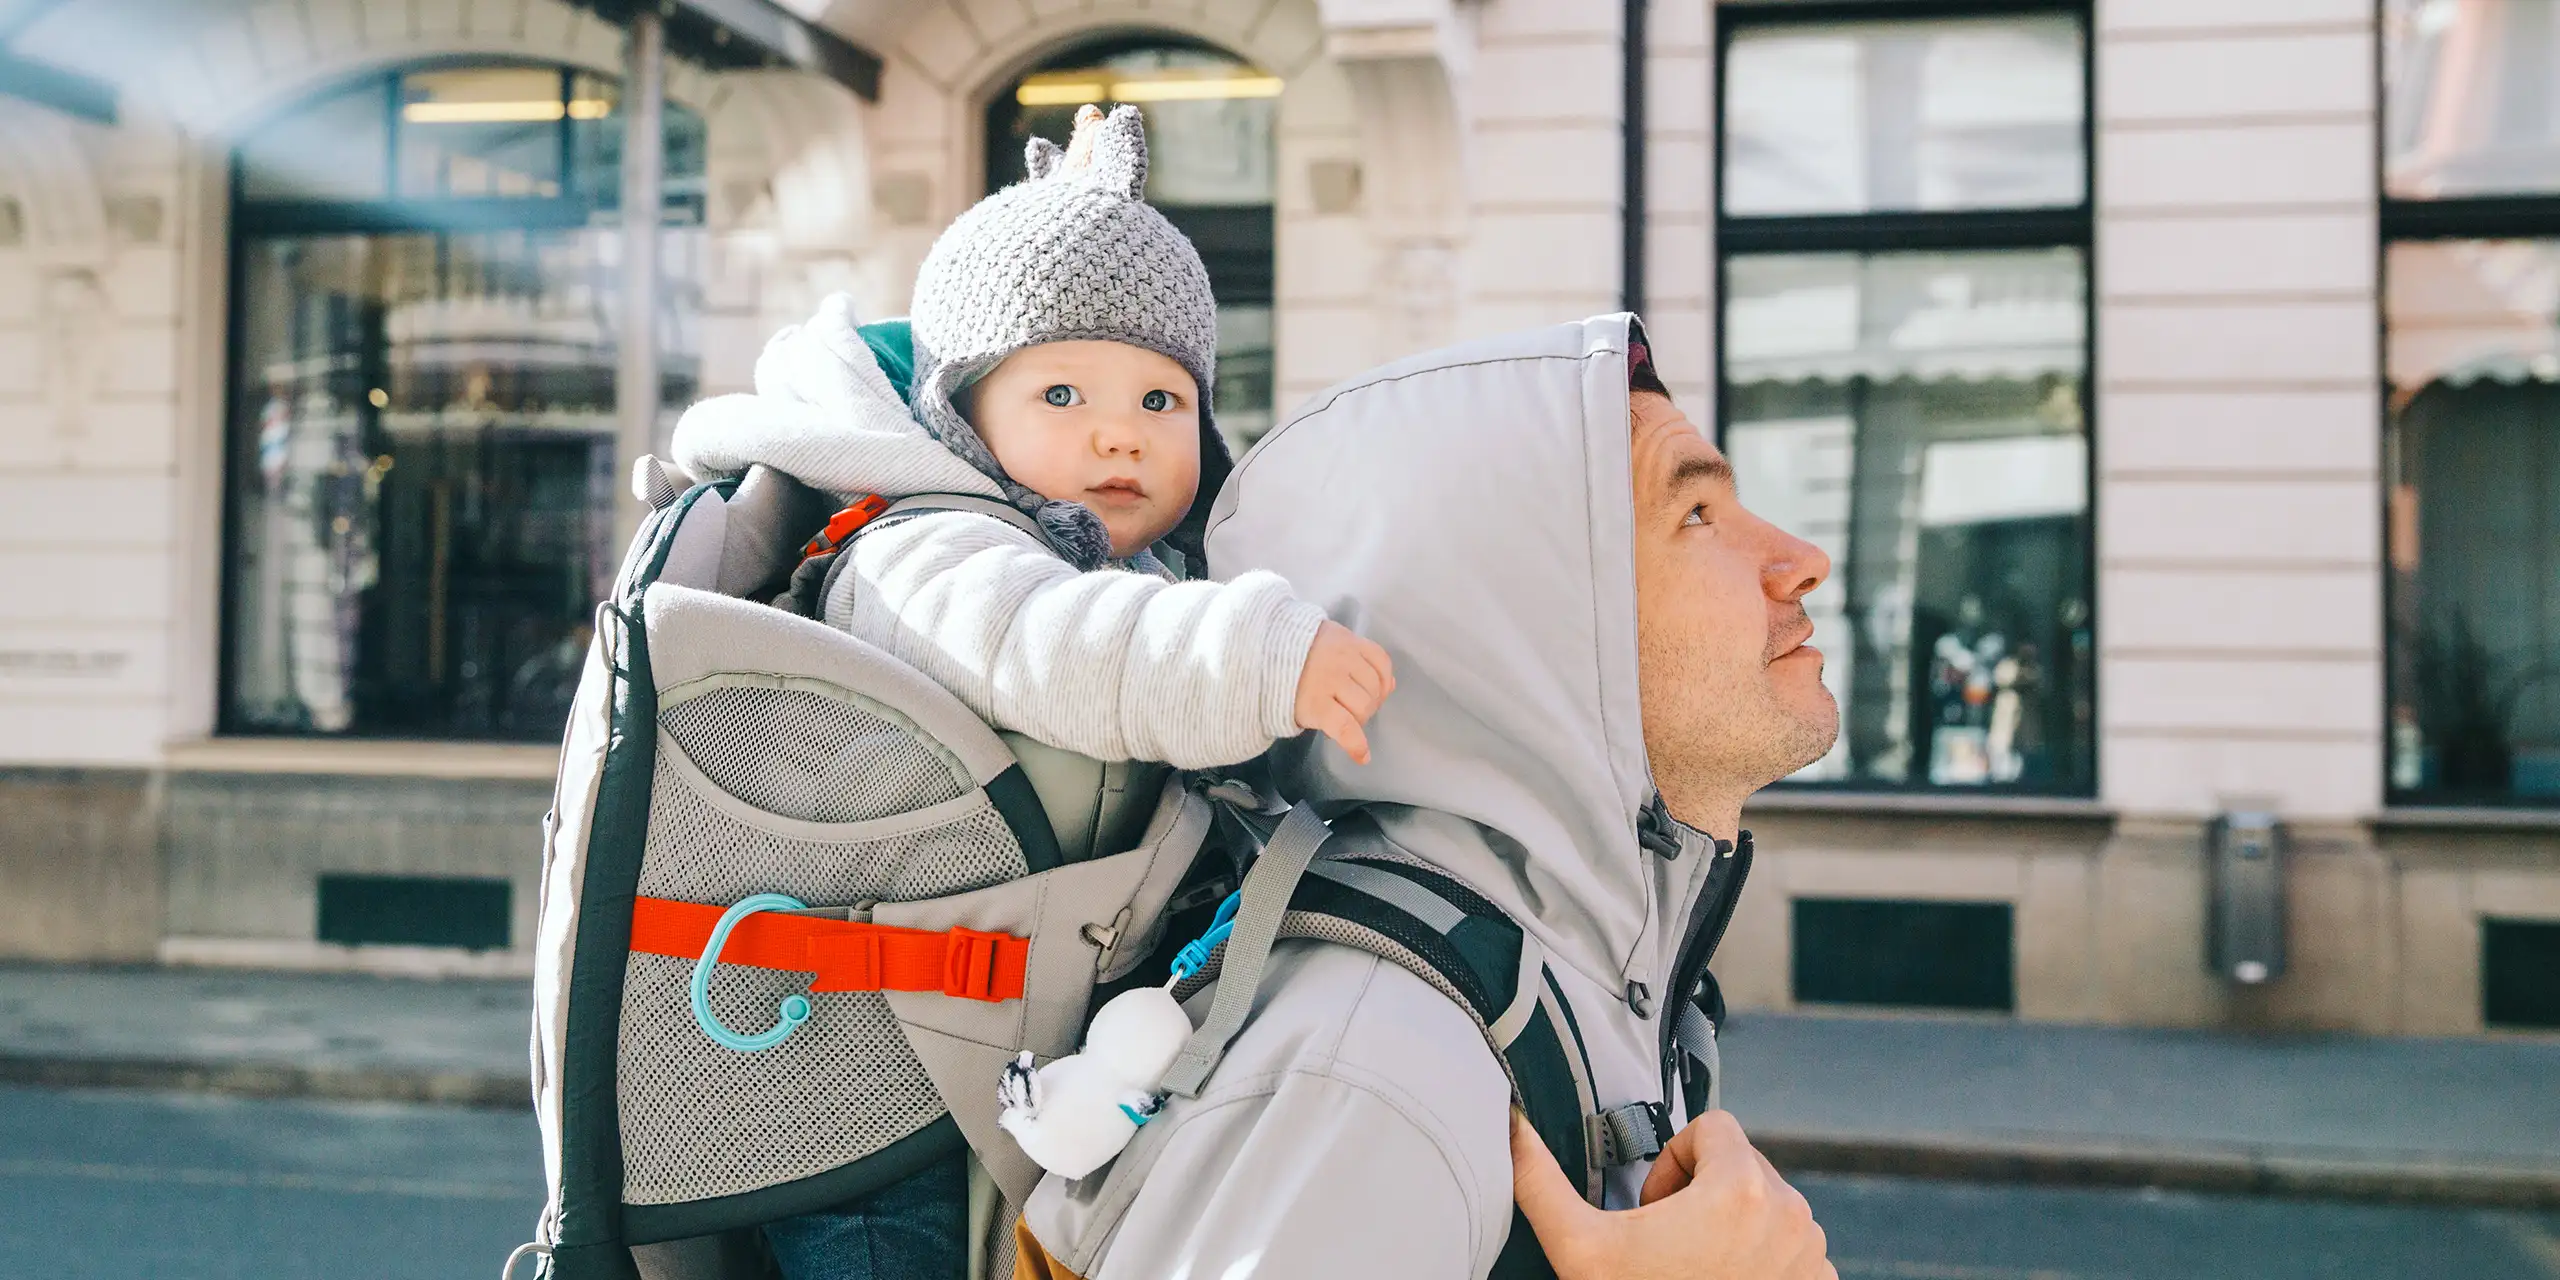 dad walking with a baby in a carrier backpack; Courtesy Natalia Deriabina/Shutterstock